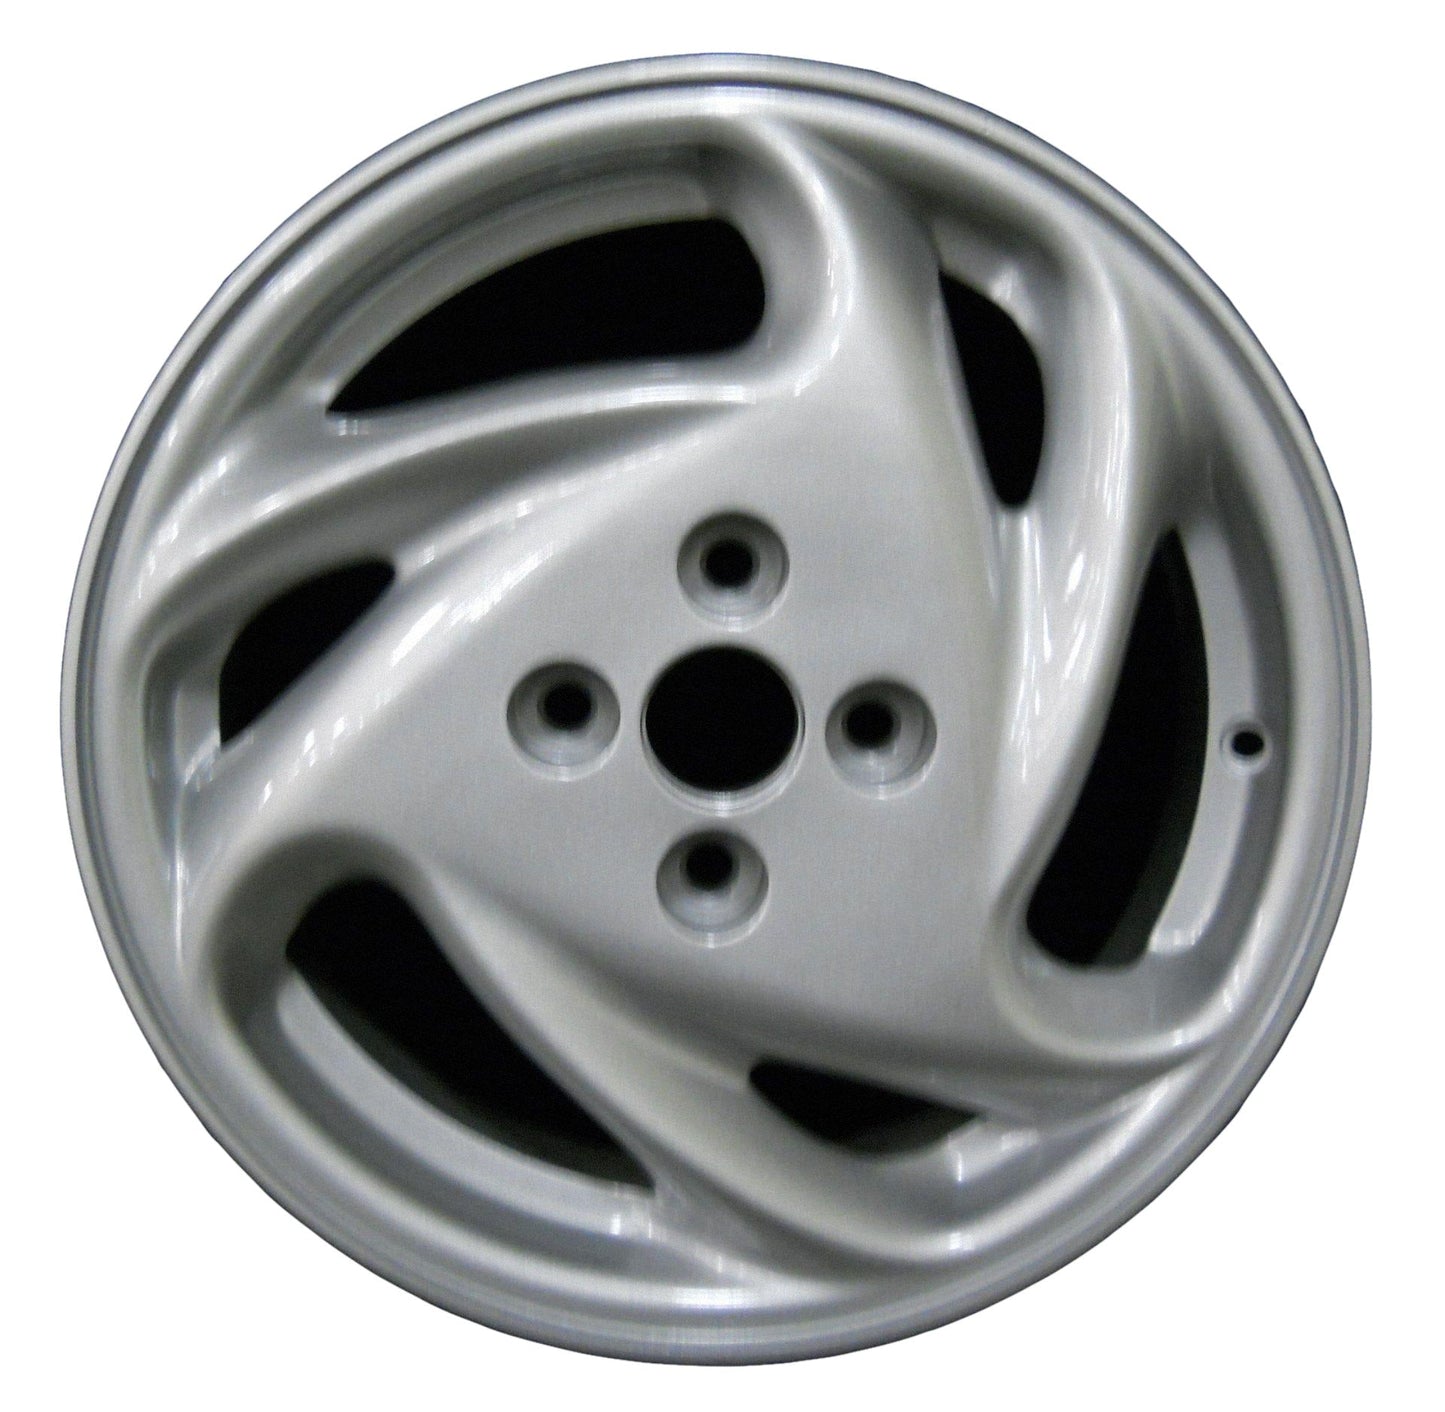 Ford Escort  1998, 1999, 2000, 2001, 2002 Factory OEM Car Wheel Size 15x5.5 Alloy WAO.3247.PS02.FF